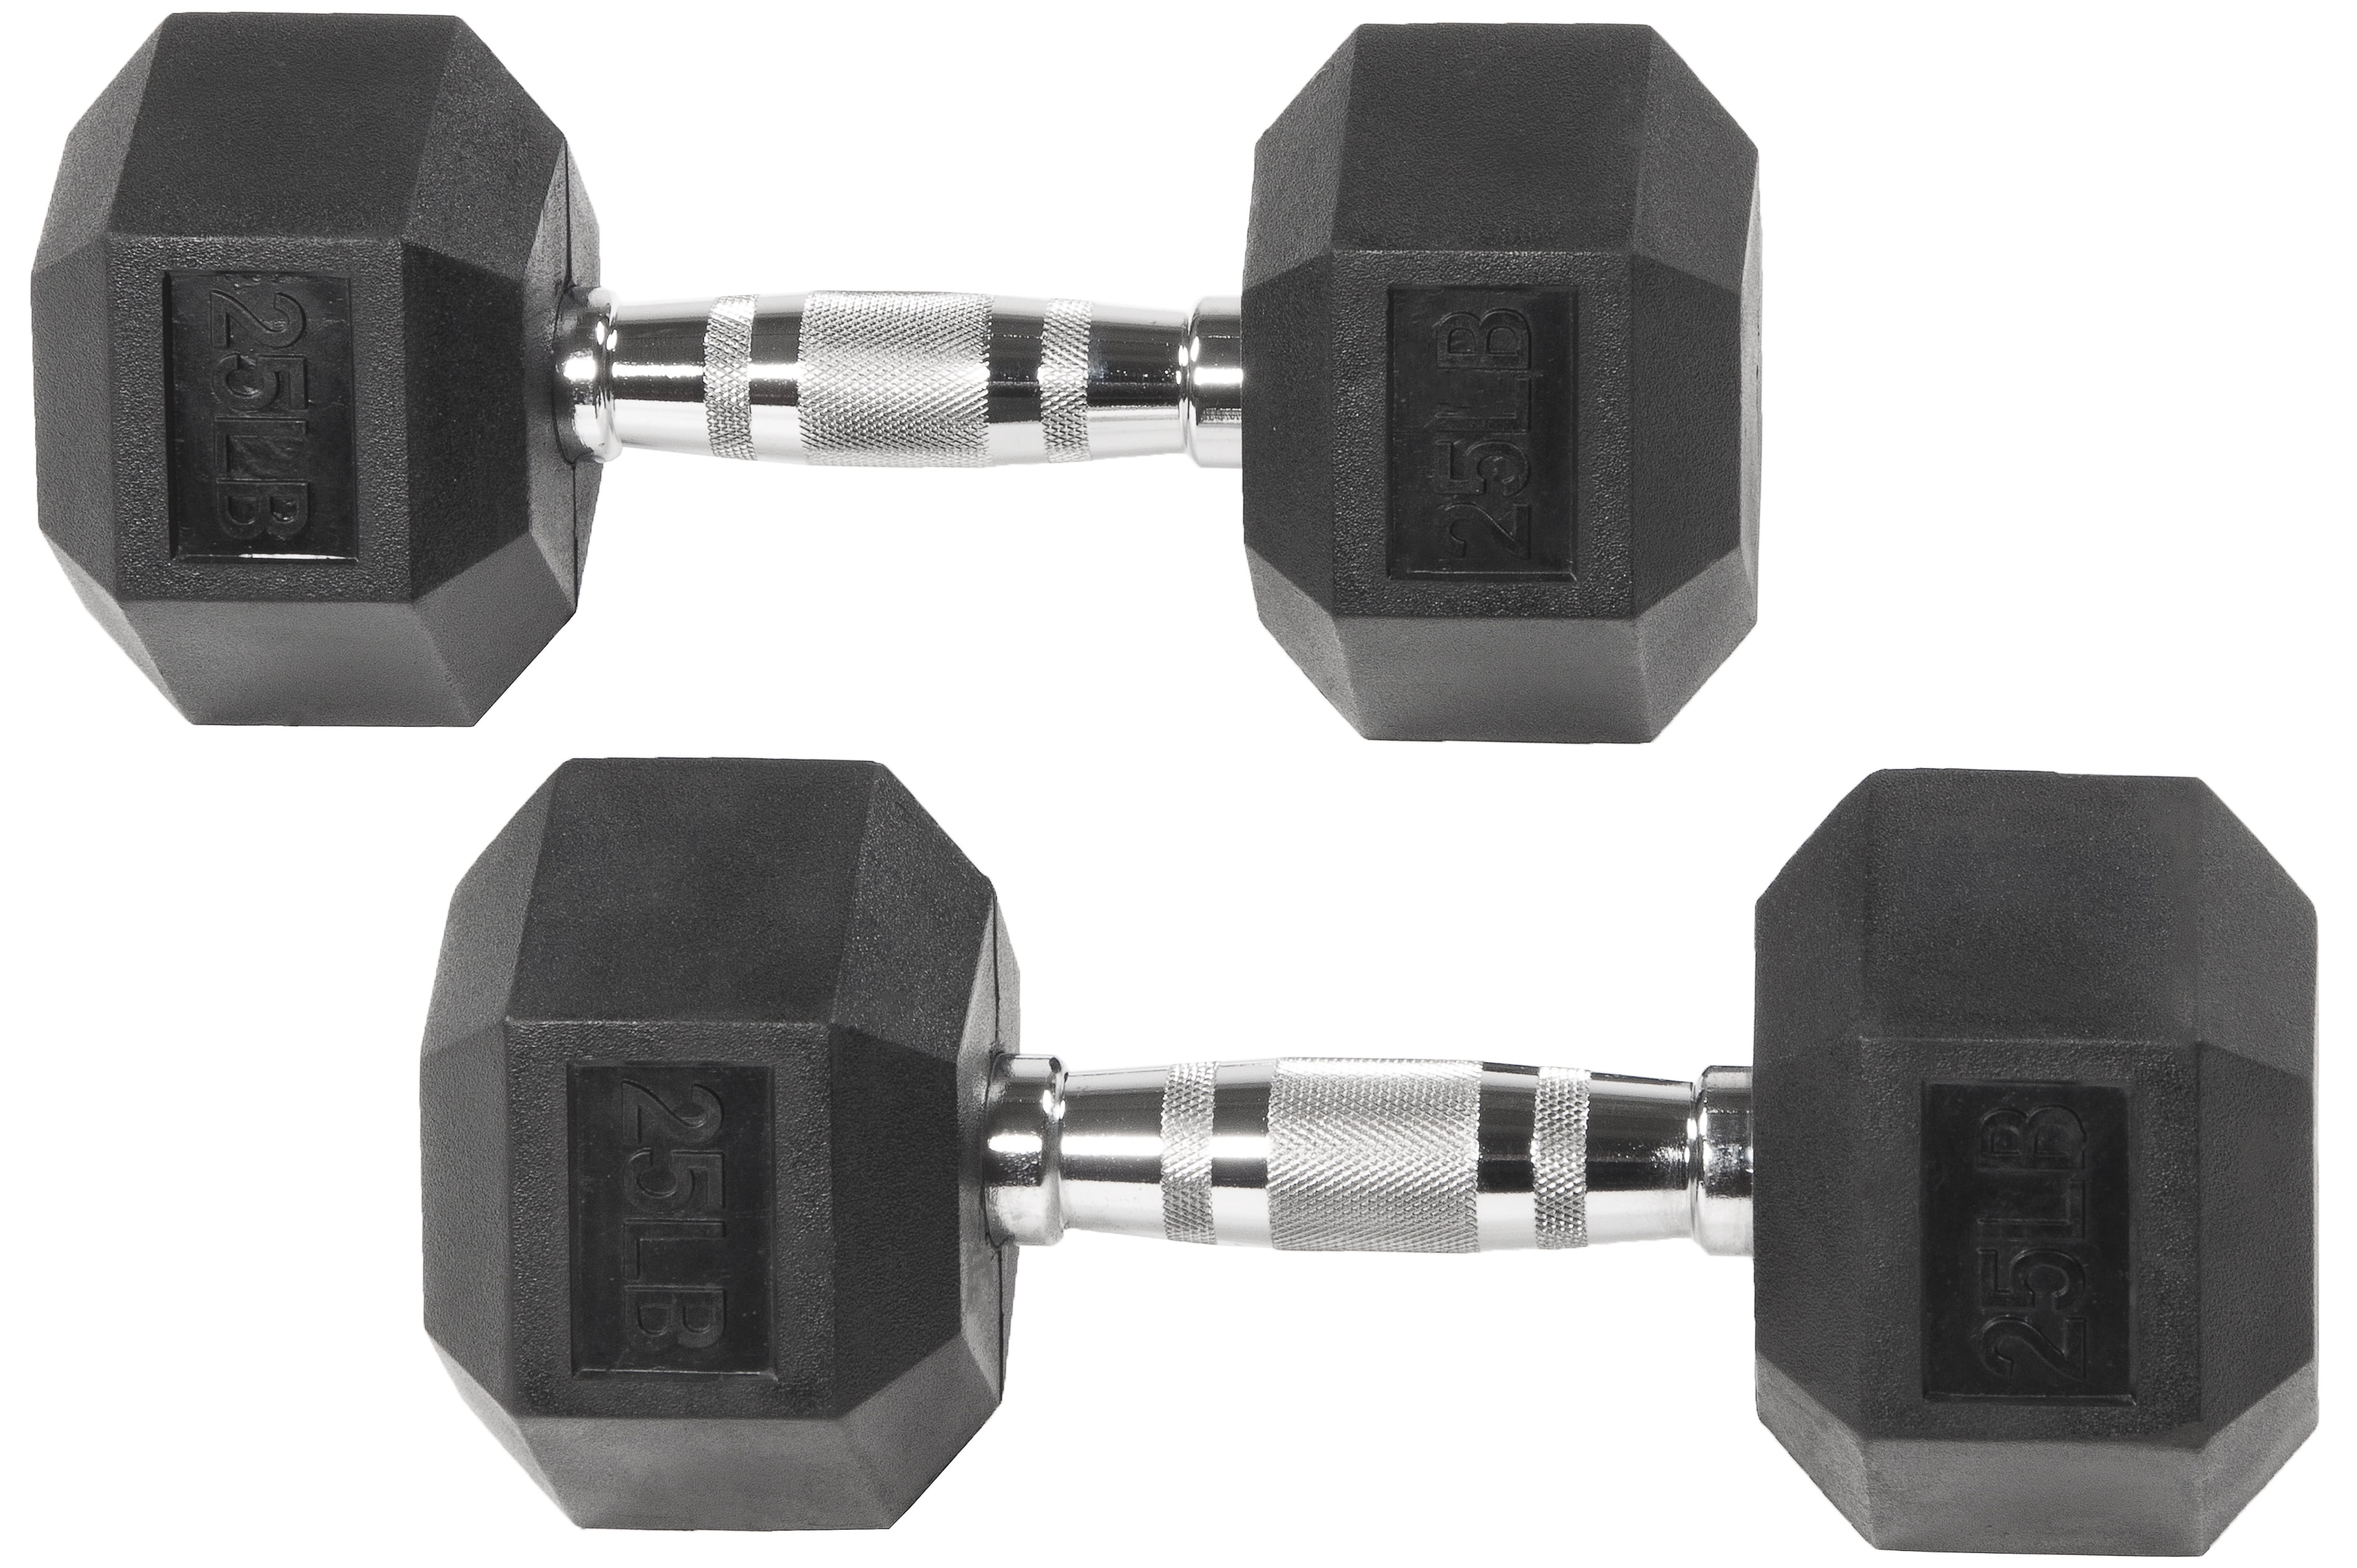 2x New Rubber Barbell Coated Hex Dumbbells PAIR of 25LB Weight Gym TOTAL 50LBS 